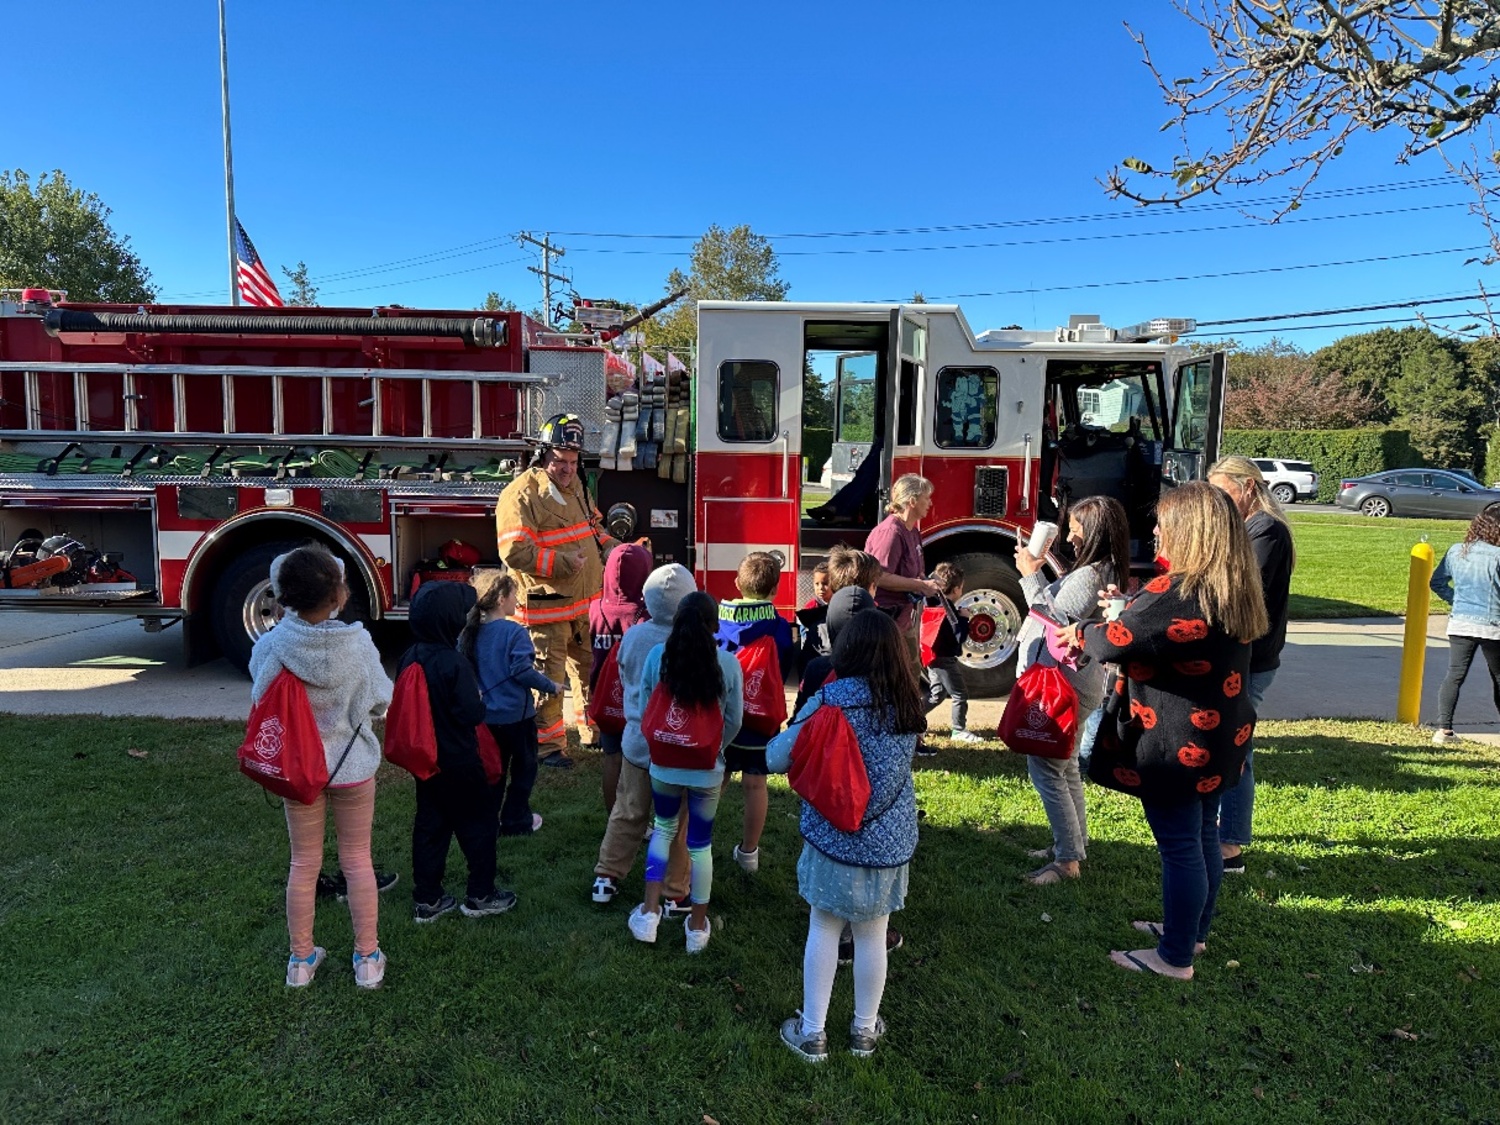 The Southampton Fire Department brought its
engines, ladder truck, and stump jumper to Tuckahoe School last week to teach the students about fire safety. Students saw the vehicles in action and learned how they are used during emergencies. A highlight of the visit was the simulated smokehouse. In this safe, controlled environment, fog is created to mimic the conditions of a real fire. Students crawled through the smokehouse under the watchful eyes of the firefighters. The experience taught the students what to do if they ever find themselves in a smoke-filled room. COURTESY TUCKAHOE SCHOOL DISTRICT